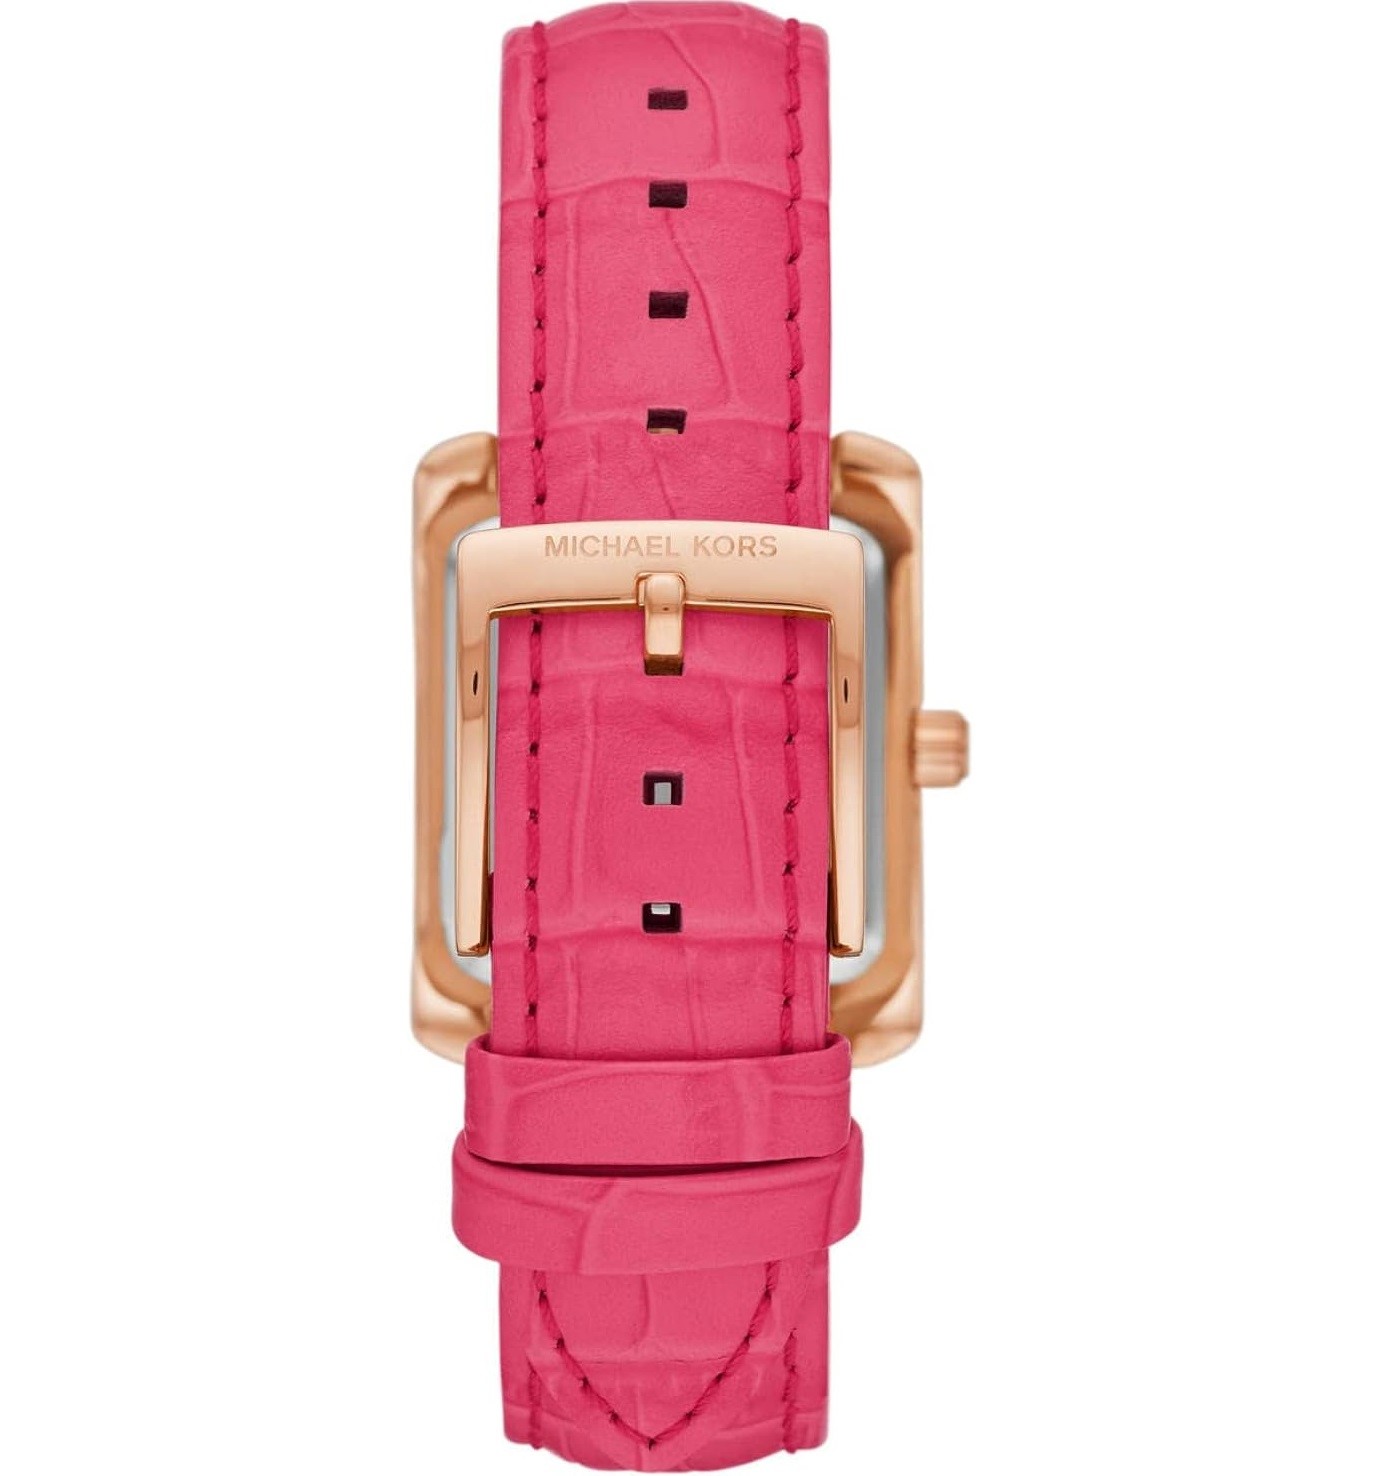 ĐỒNG HỒ ĐEO TAY DÂY DA MK NỮ MICHAEL KORS EMERY PAVÉ ROSE GOLD-TONE AND CROCODILE EMBOSSED LEATHER WATCH MK2984 3